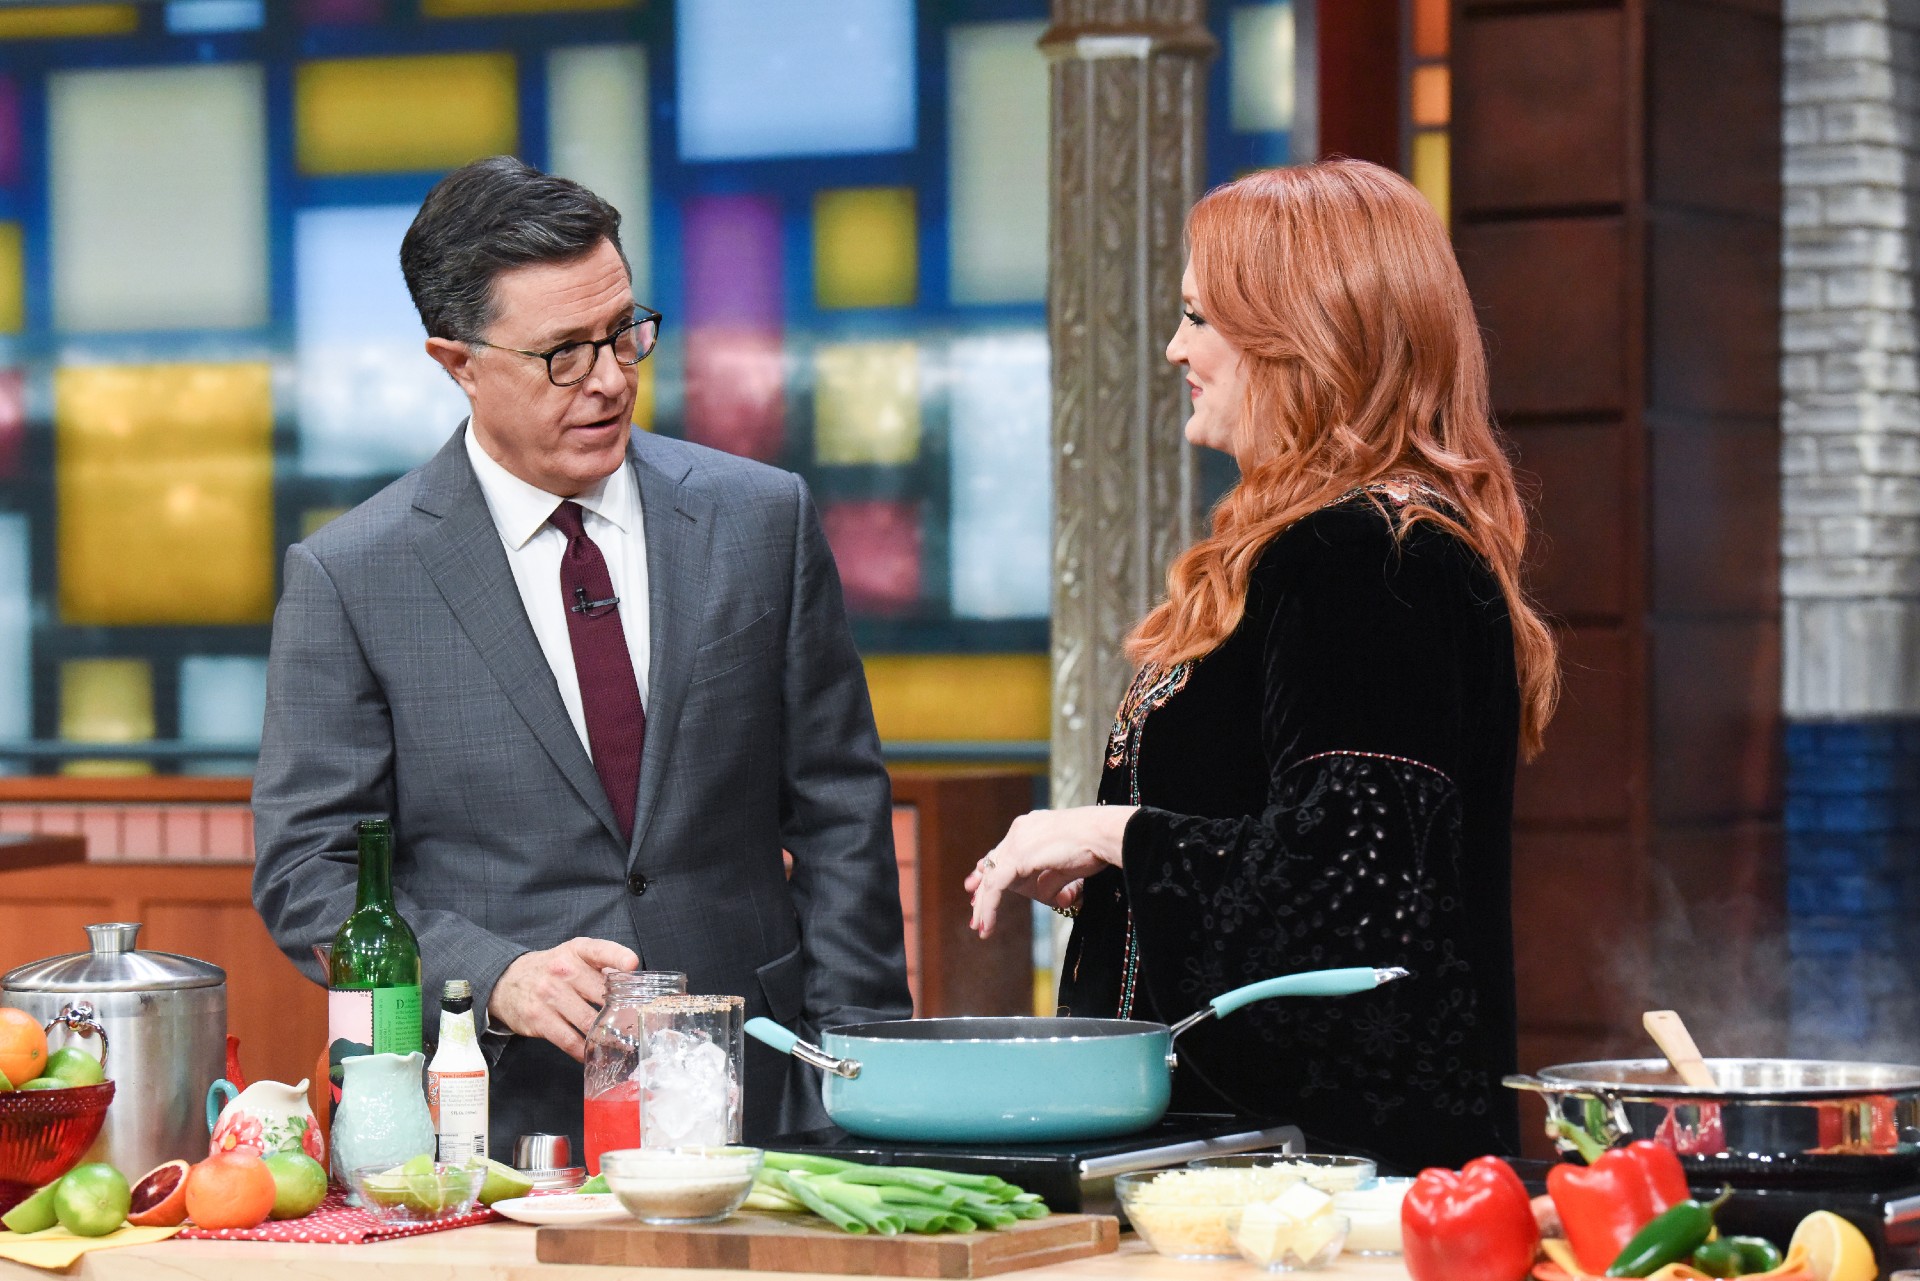 Stephen Colbert and Ree Drummond do a cooking demonstration.